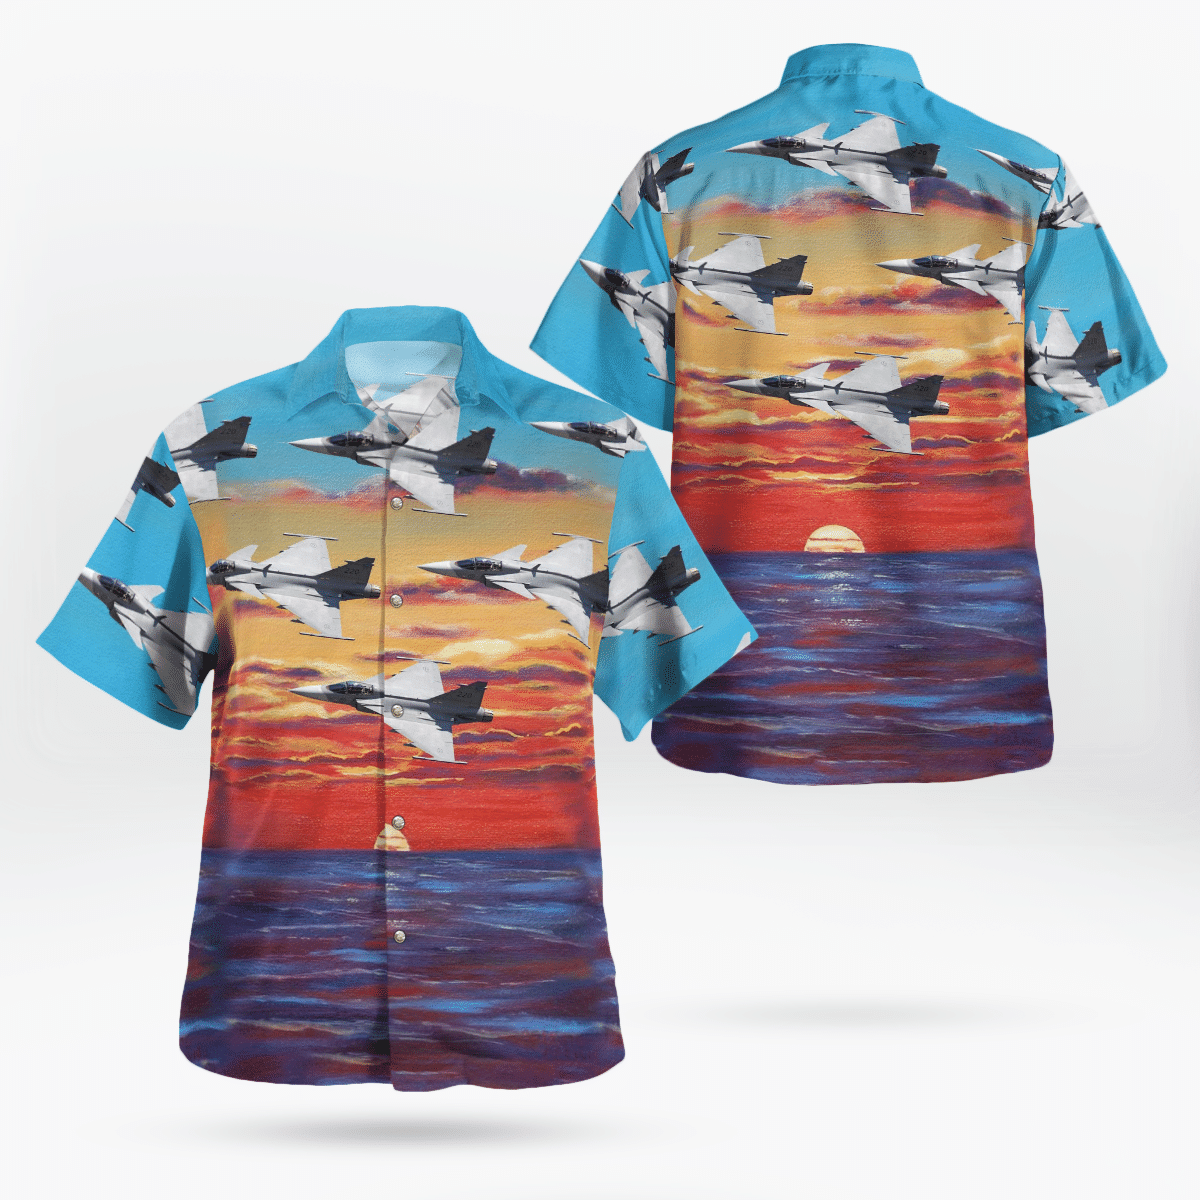 Shop now to find the perfect Hawaii Shirt for your hobby 1